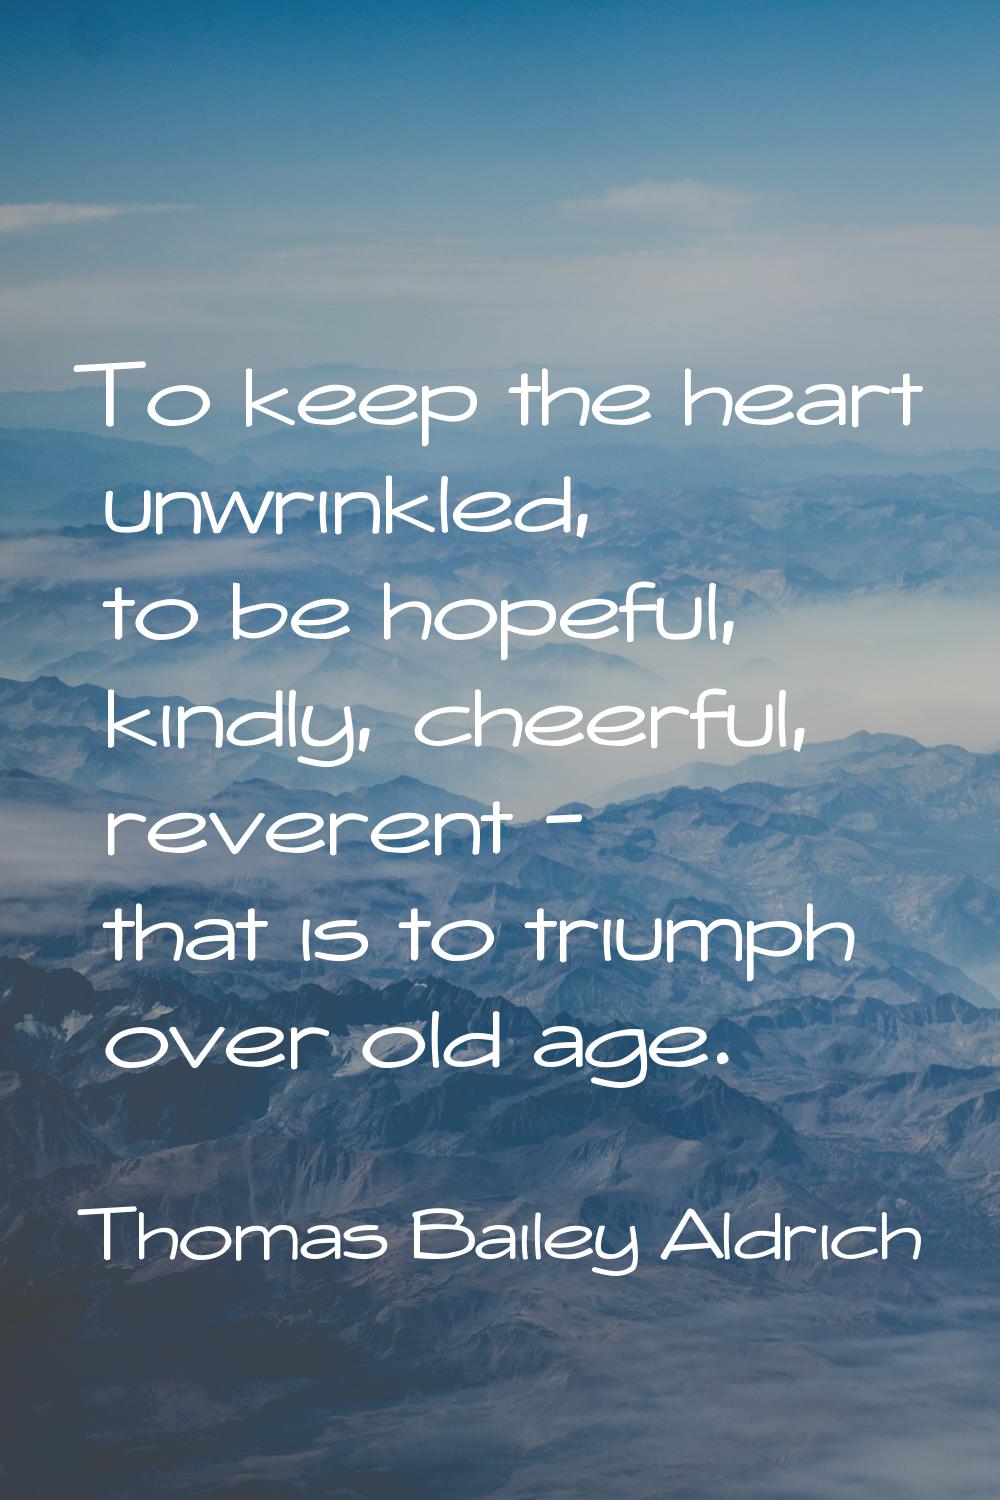 To keep the heart unwrinkled, to be hopeful, kindly, cheerful, reverent - that is to triumph over o